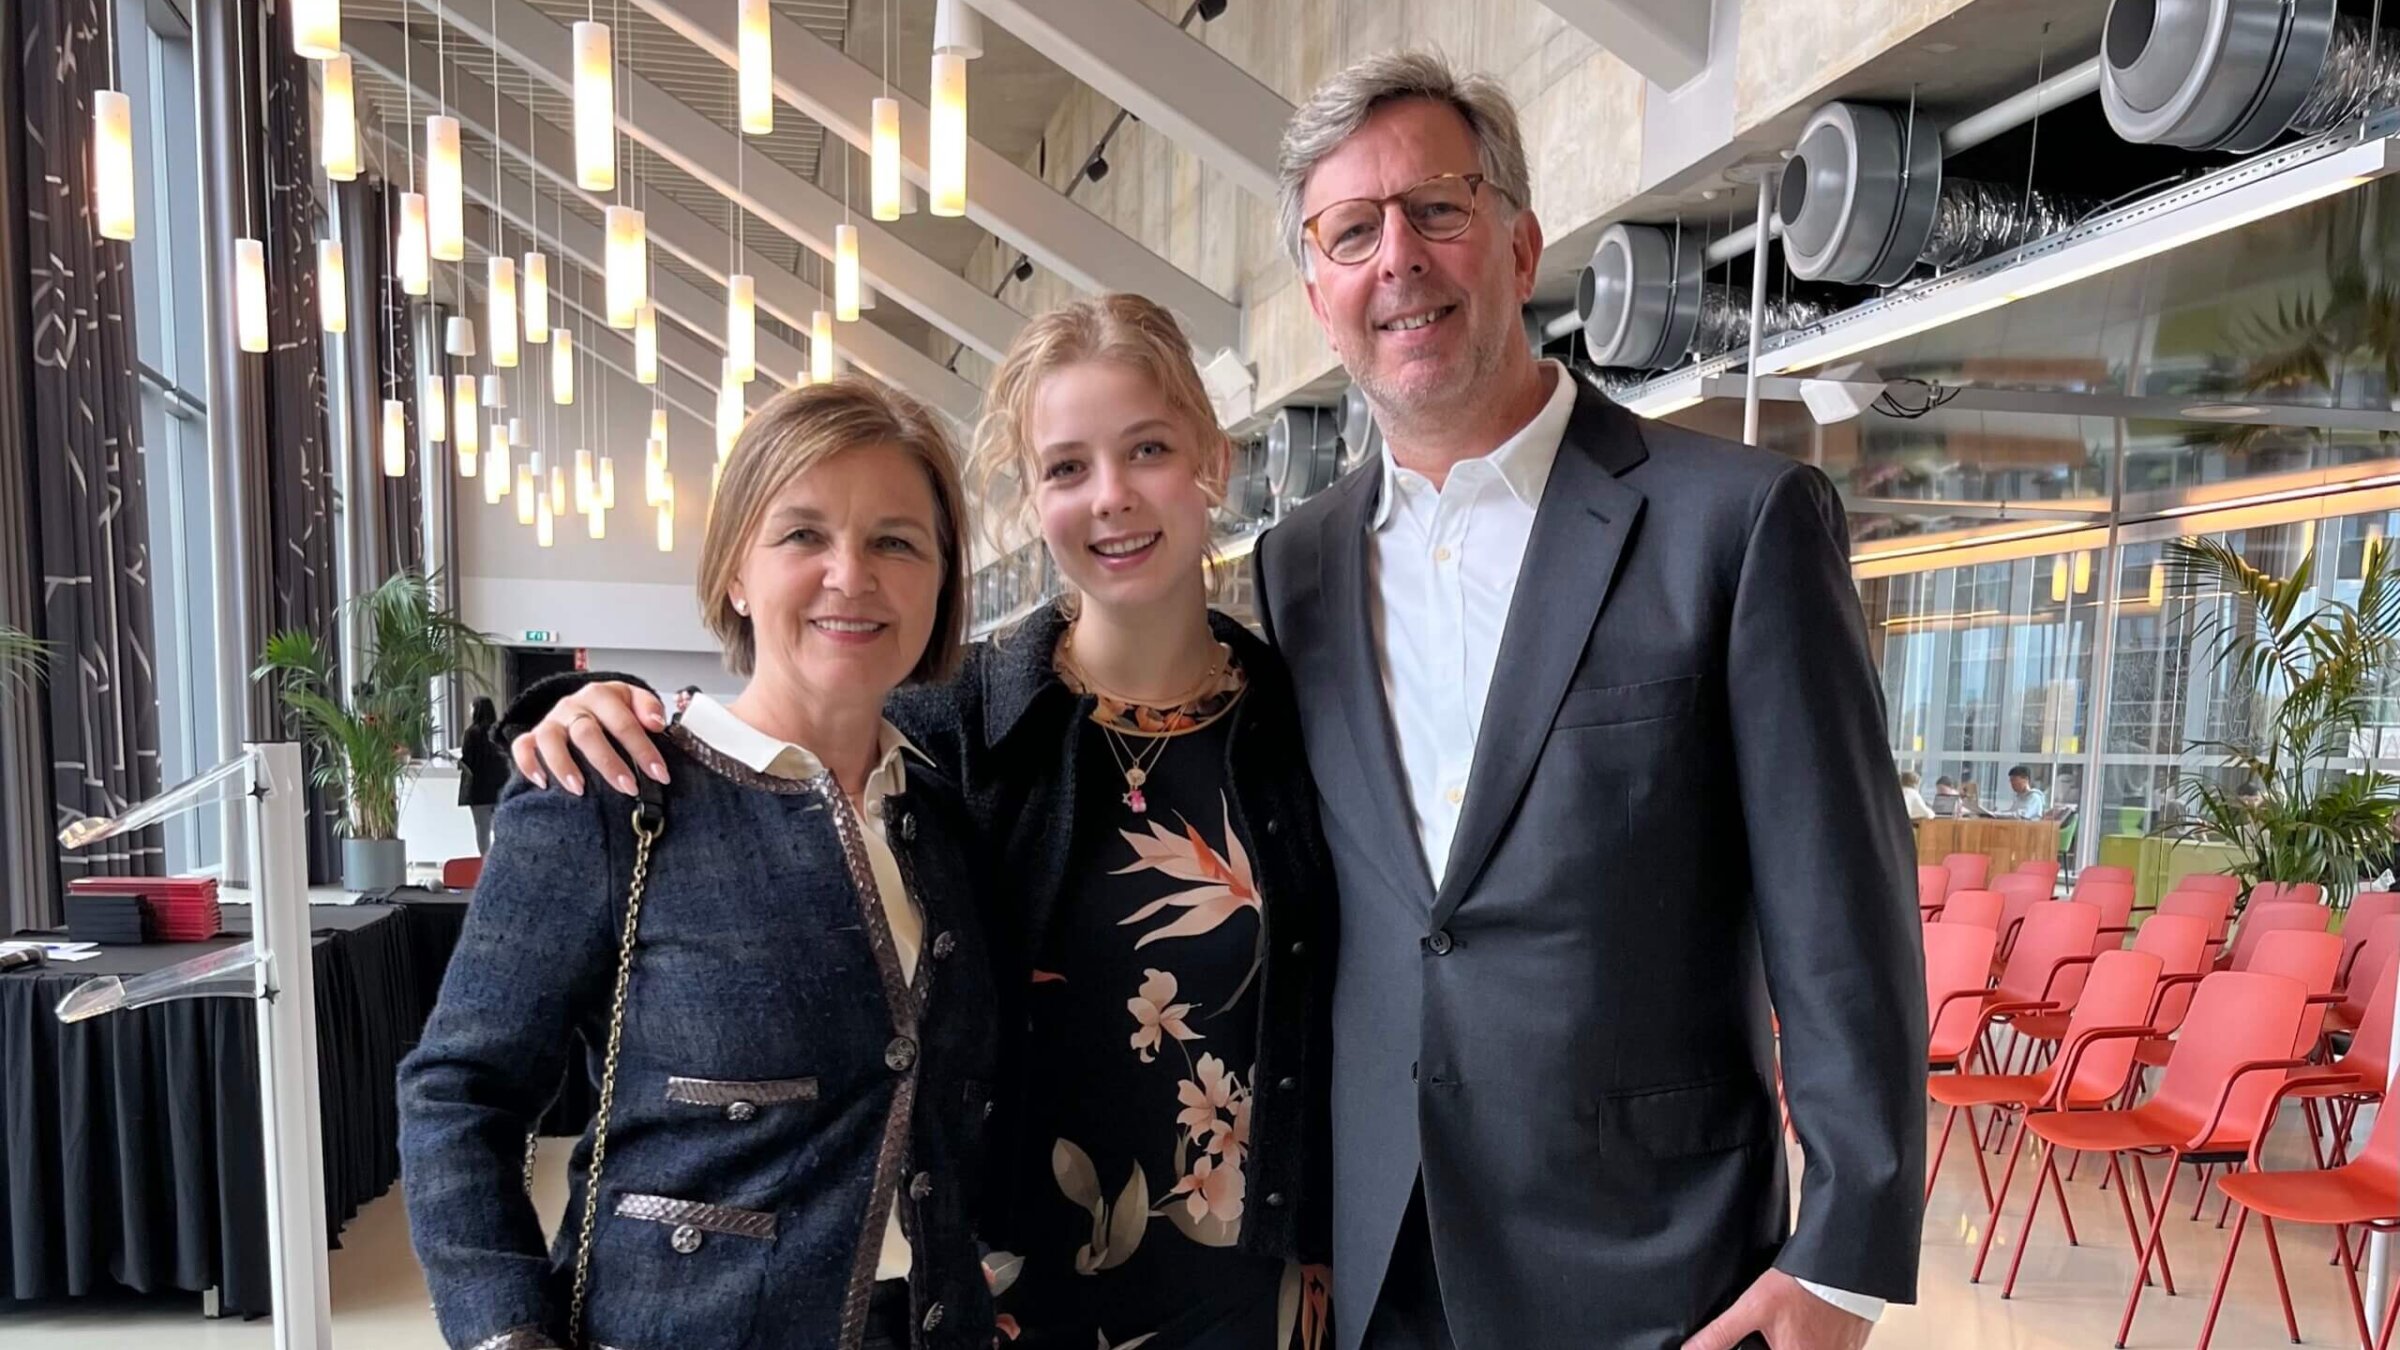 Mia Faye Kreindler with her parents, Dagmar Hesse and Richard Kreindler, at her graduation from the University of Amsterdam.